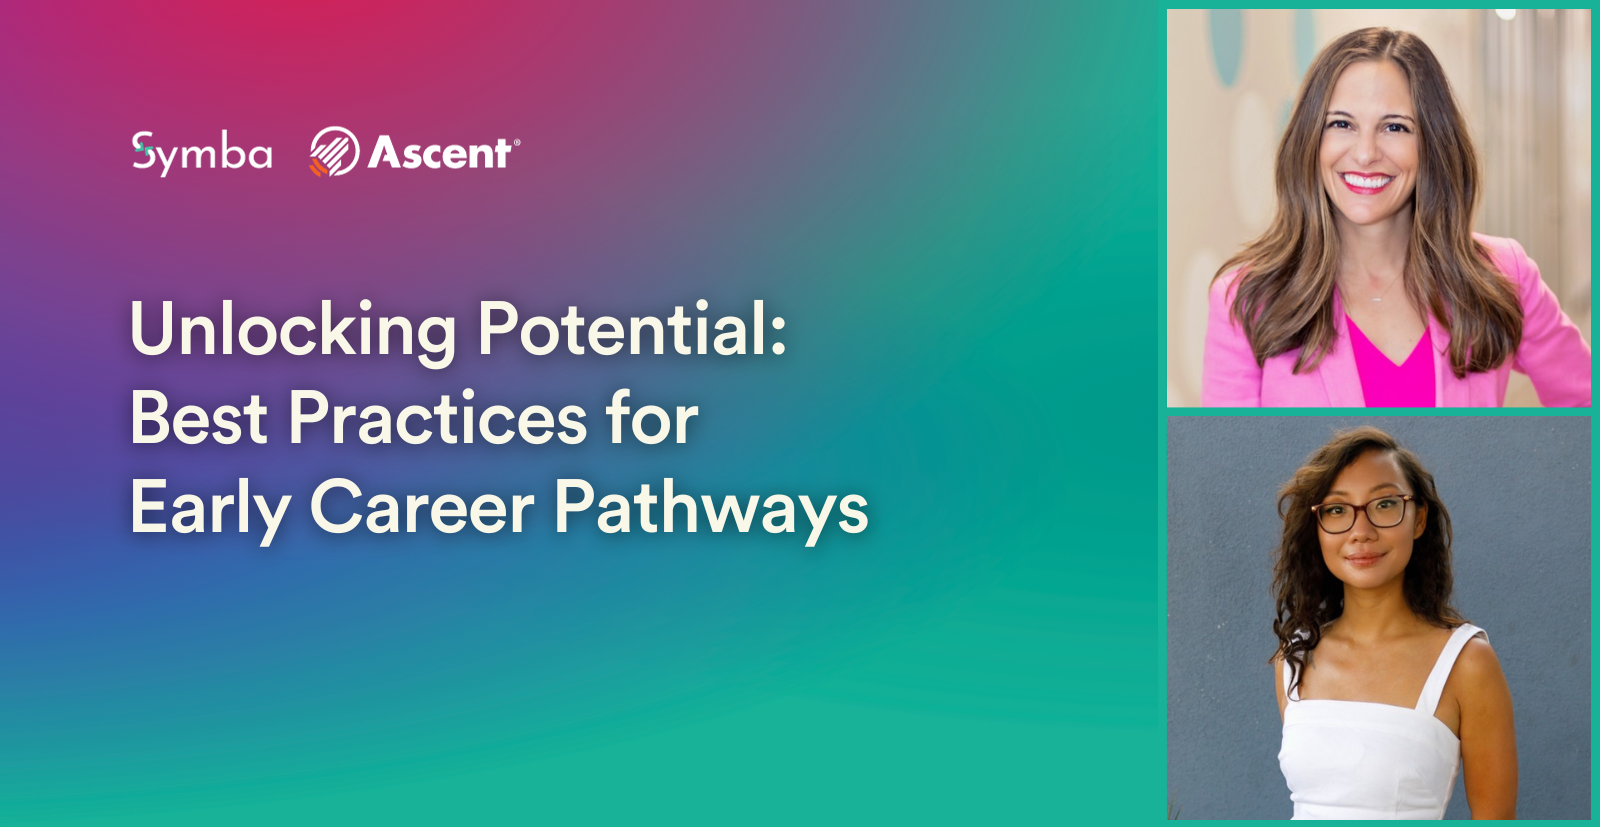 Unlocking Potential: Best Practices for Early Career Pathways